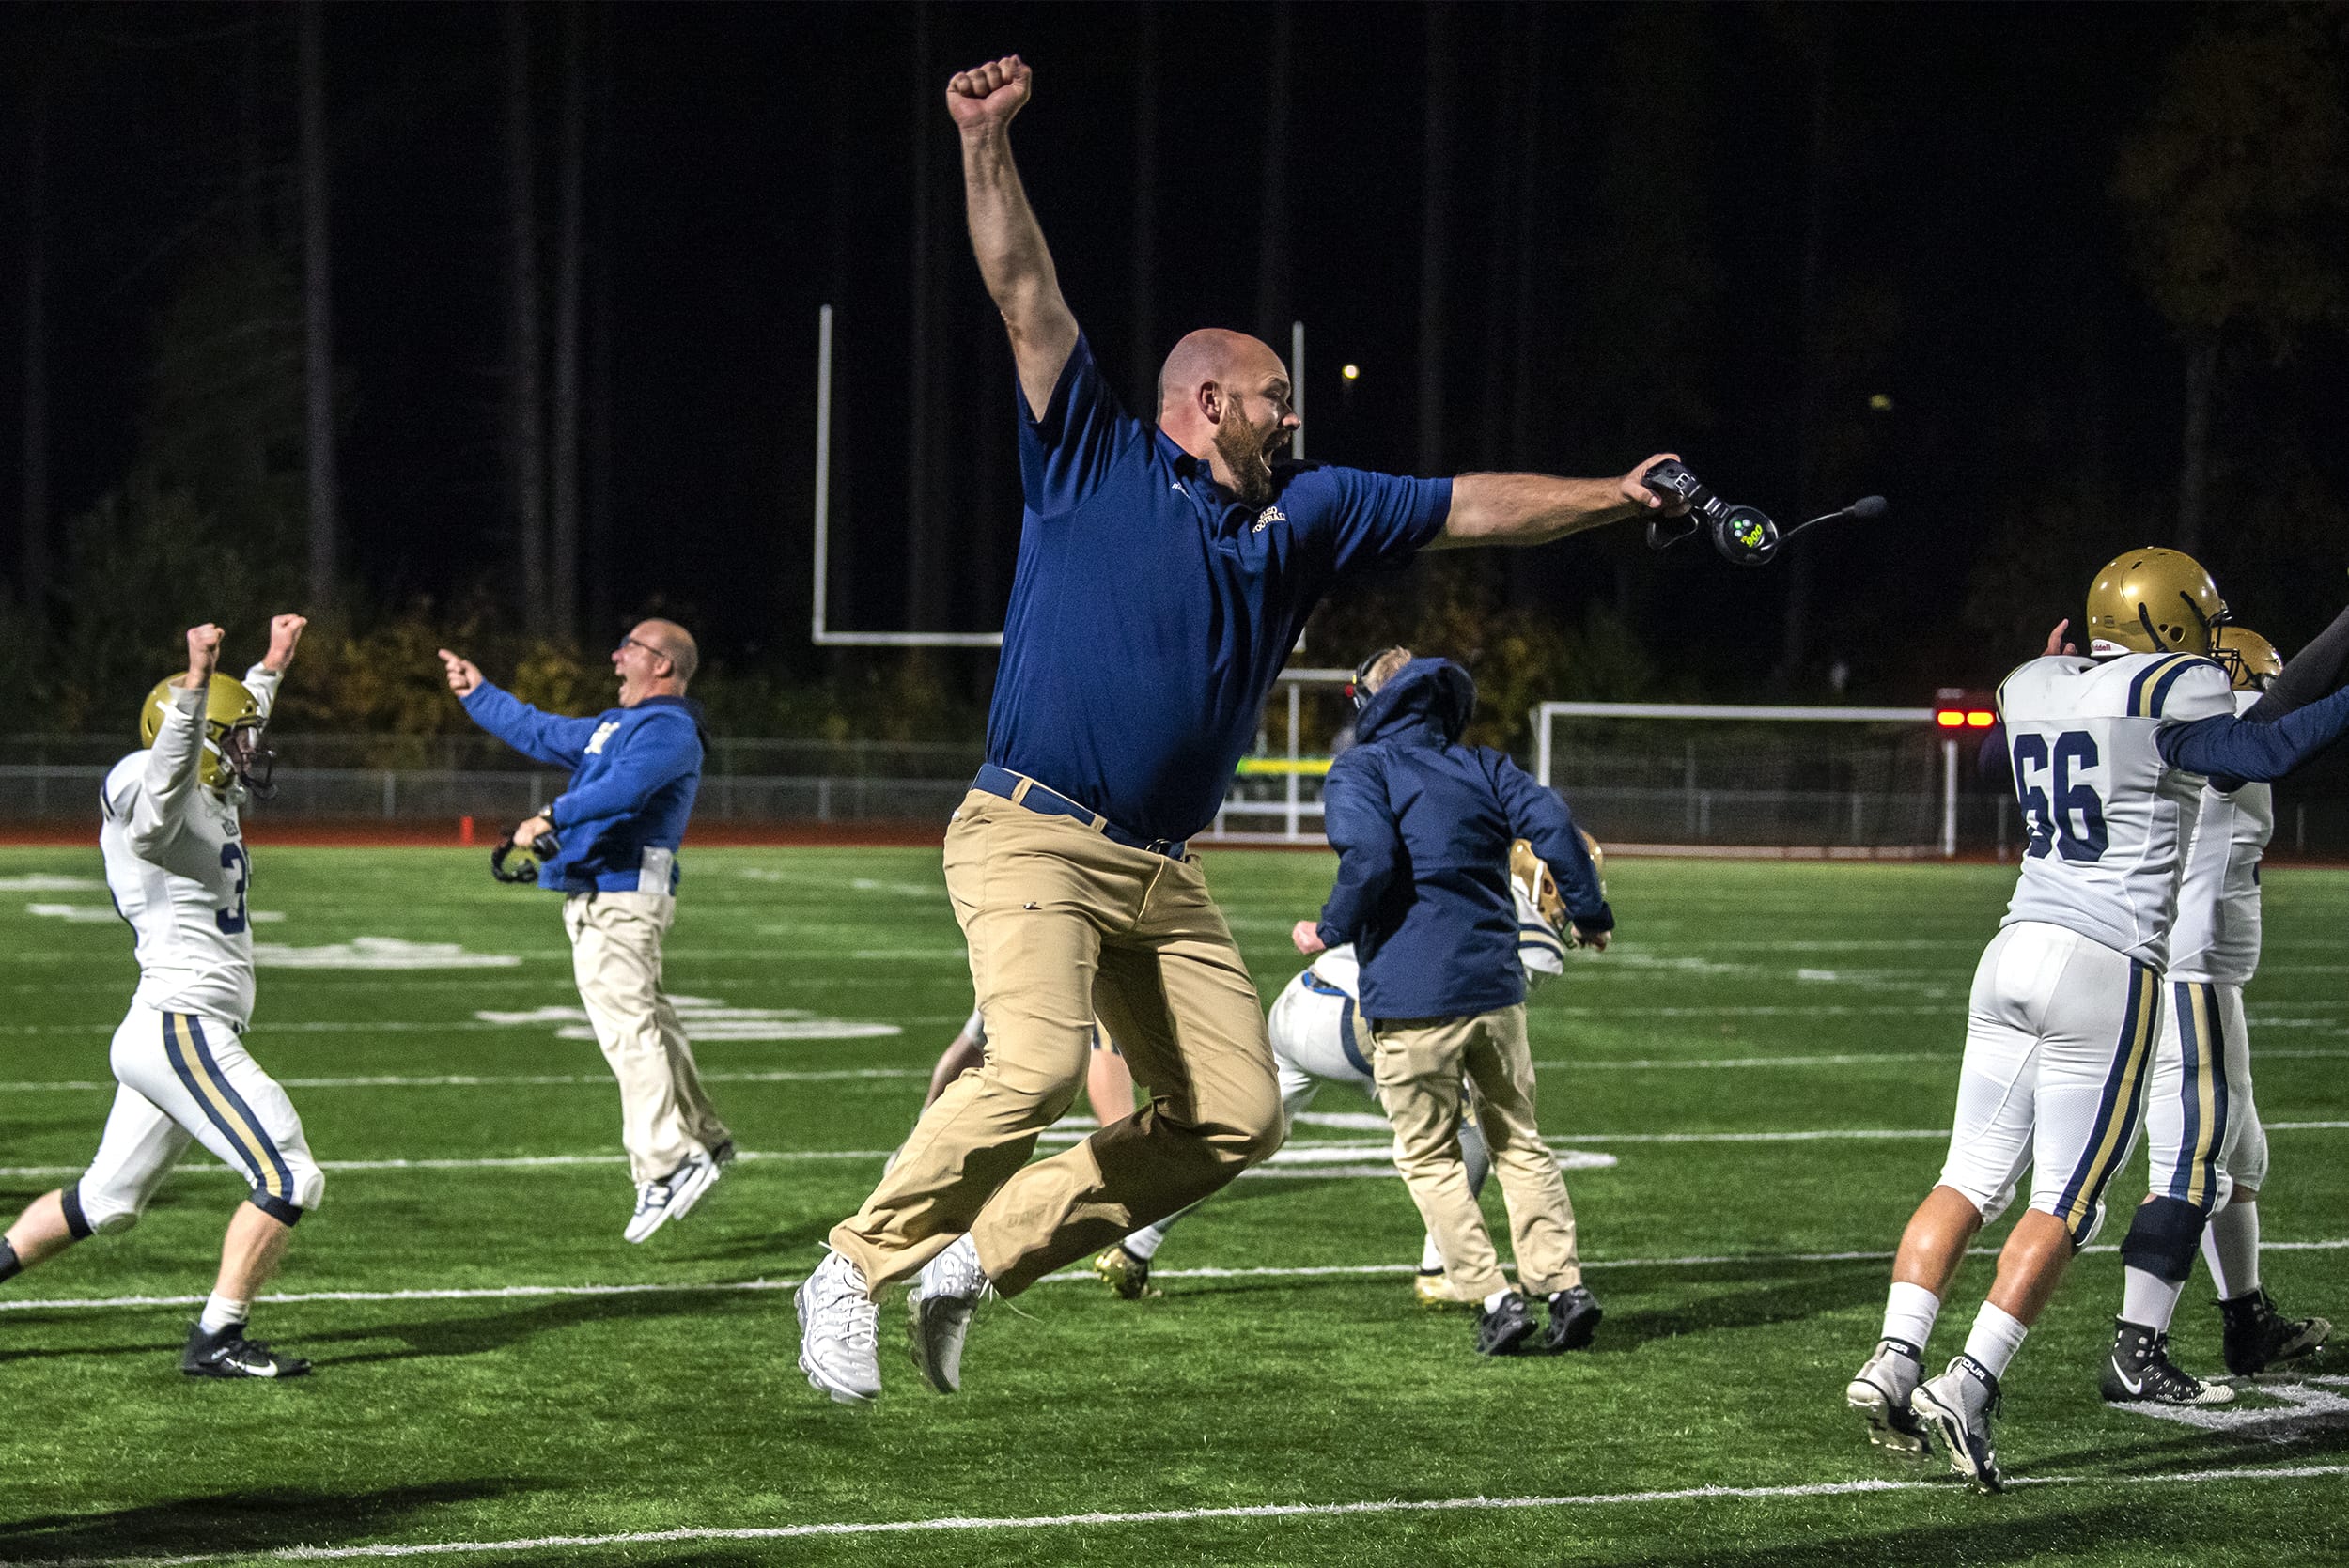 Kelso Assistant Coach Brad Phillips celebrates with the rest of his team after a fumble recovery secured victory over Mountain View during a game at McKenzie Stadium on Friday night, Oct. 25, 2019.